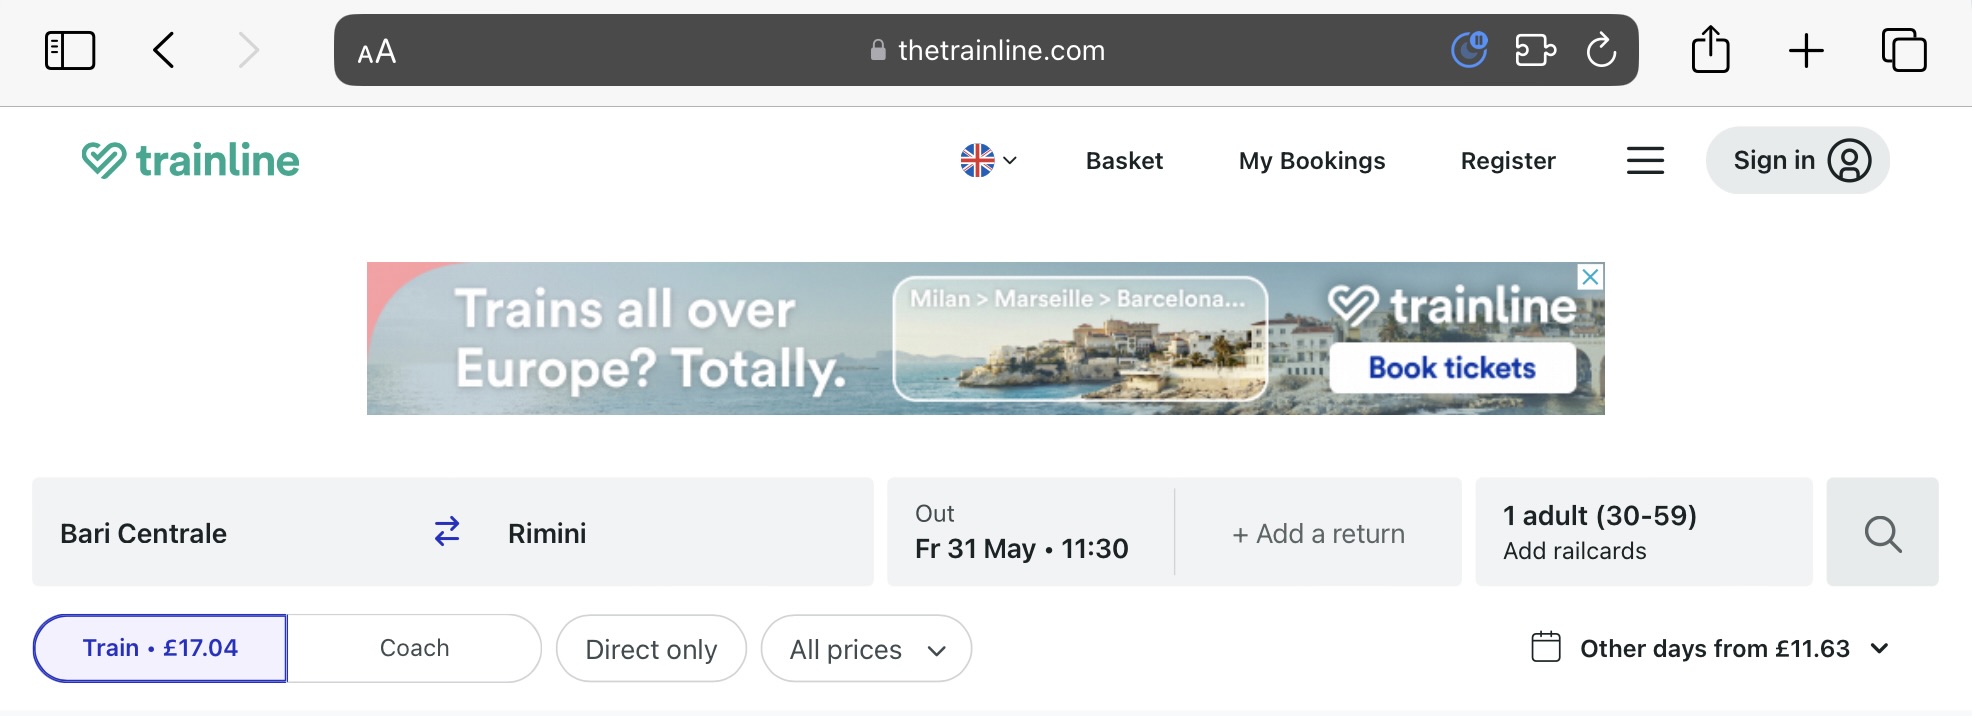 Screenshot showing looking at tickets from Bari Centrale to Rimini on the Trainline website, with an ad for Trainline with the text “Trains all over Europe? Totally.”